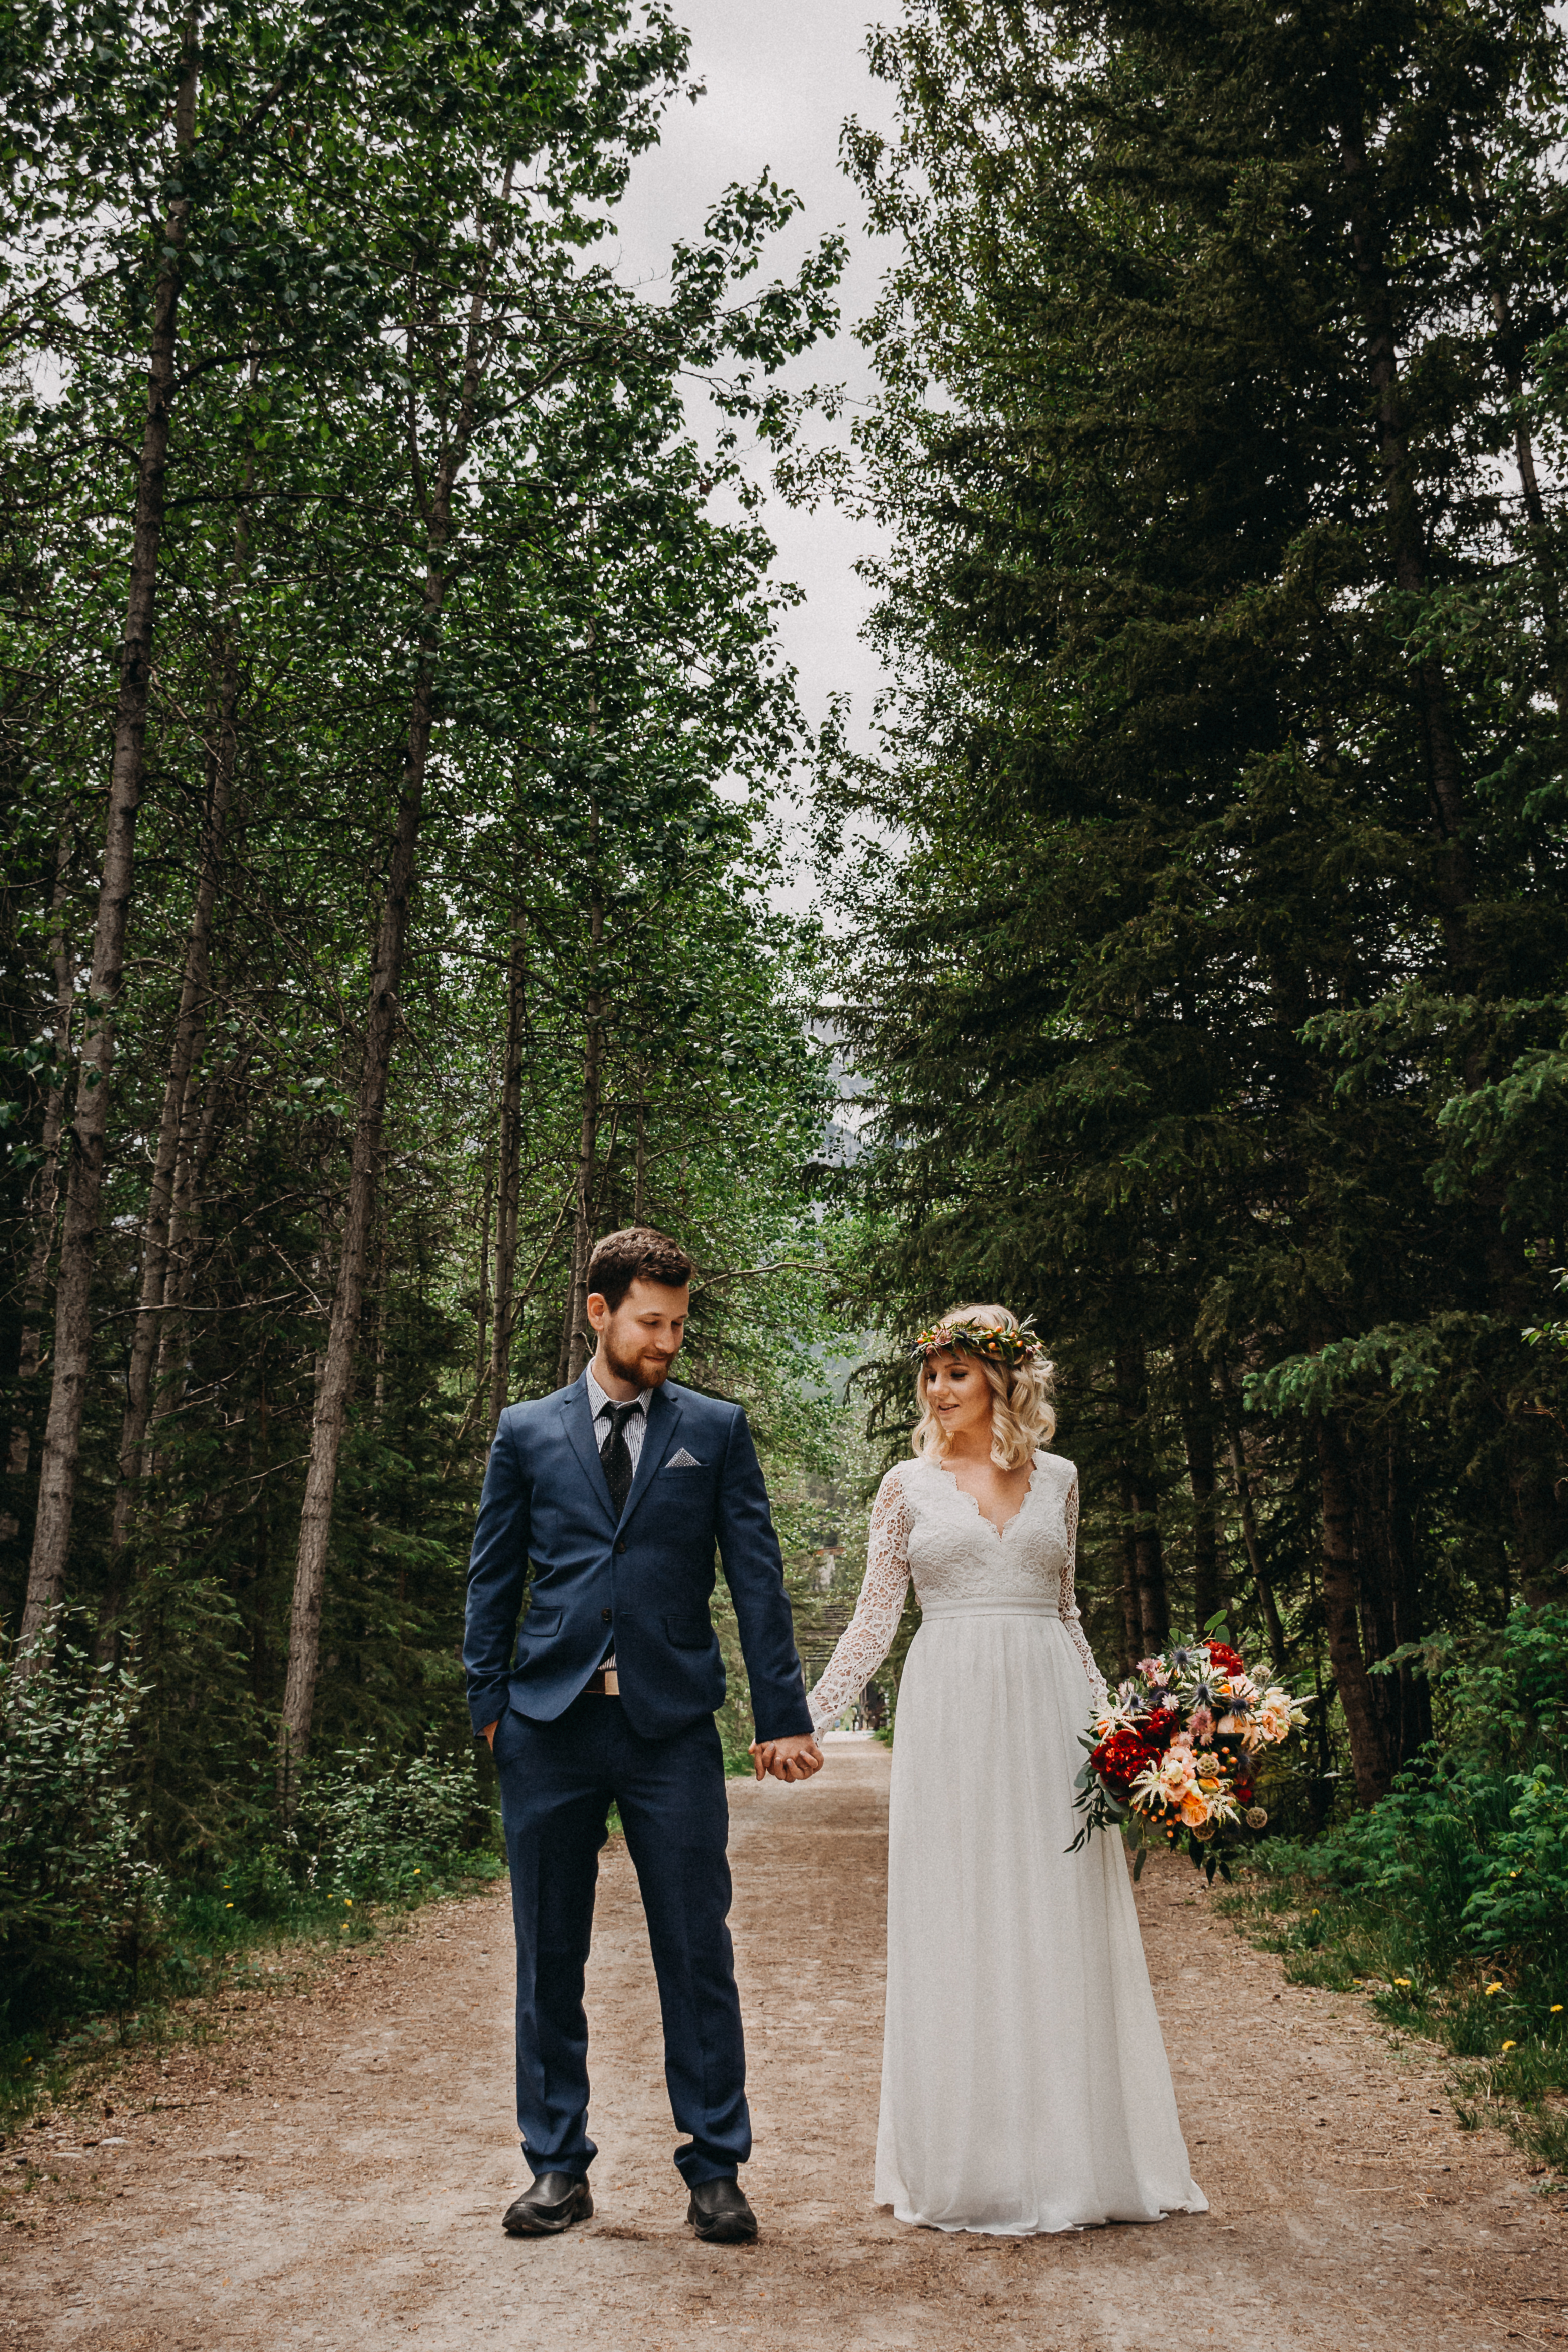 Groom and Bride standing in the woods, holding hands